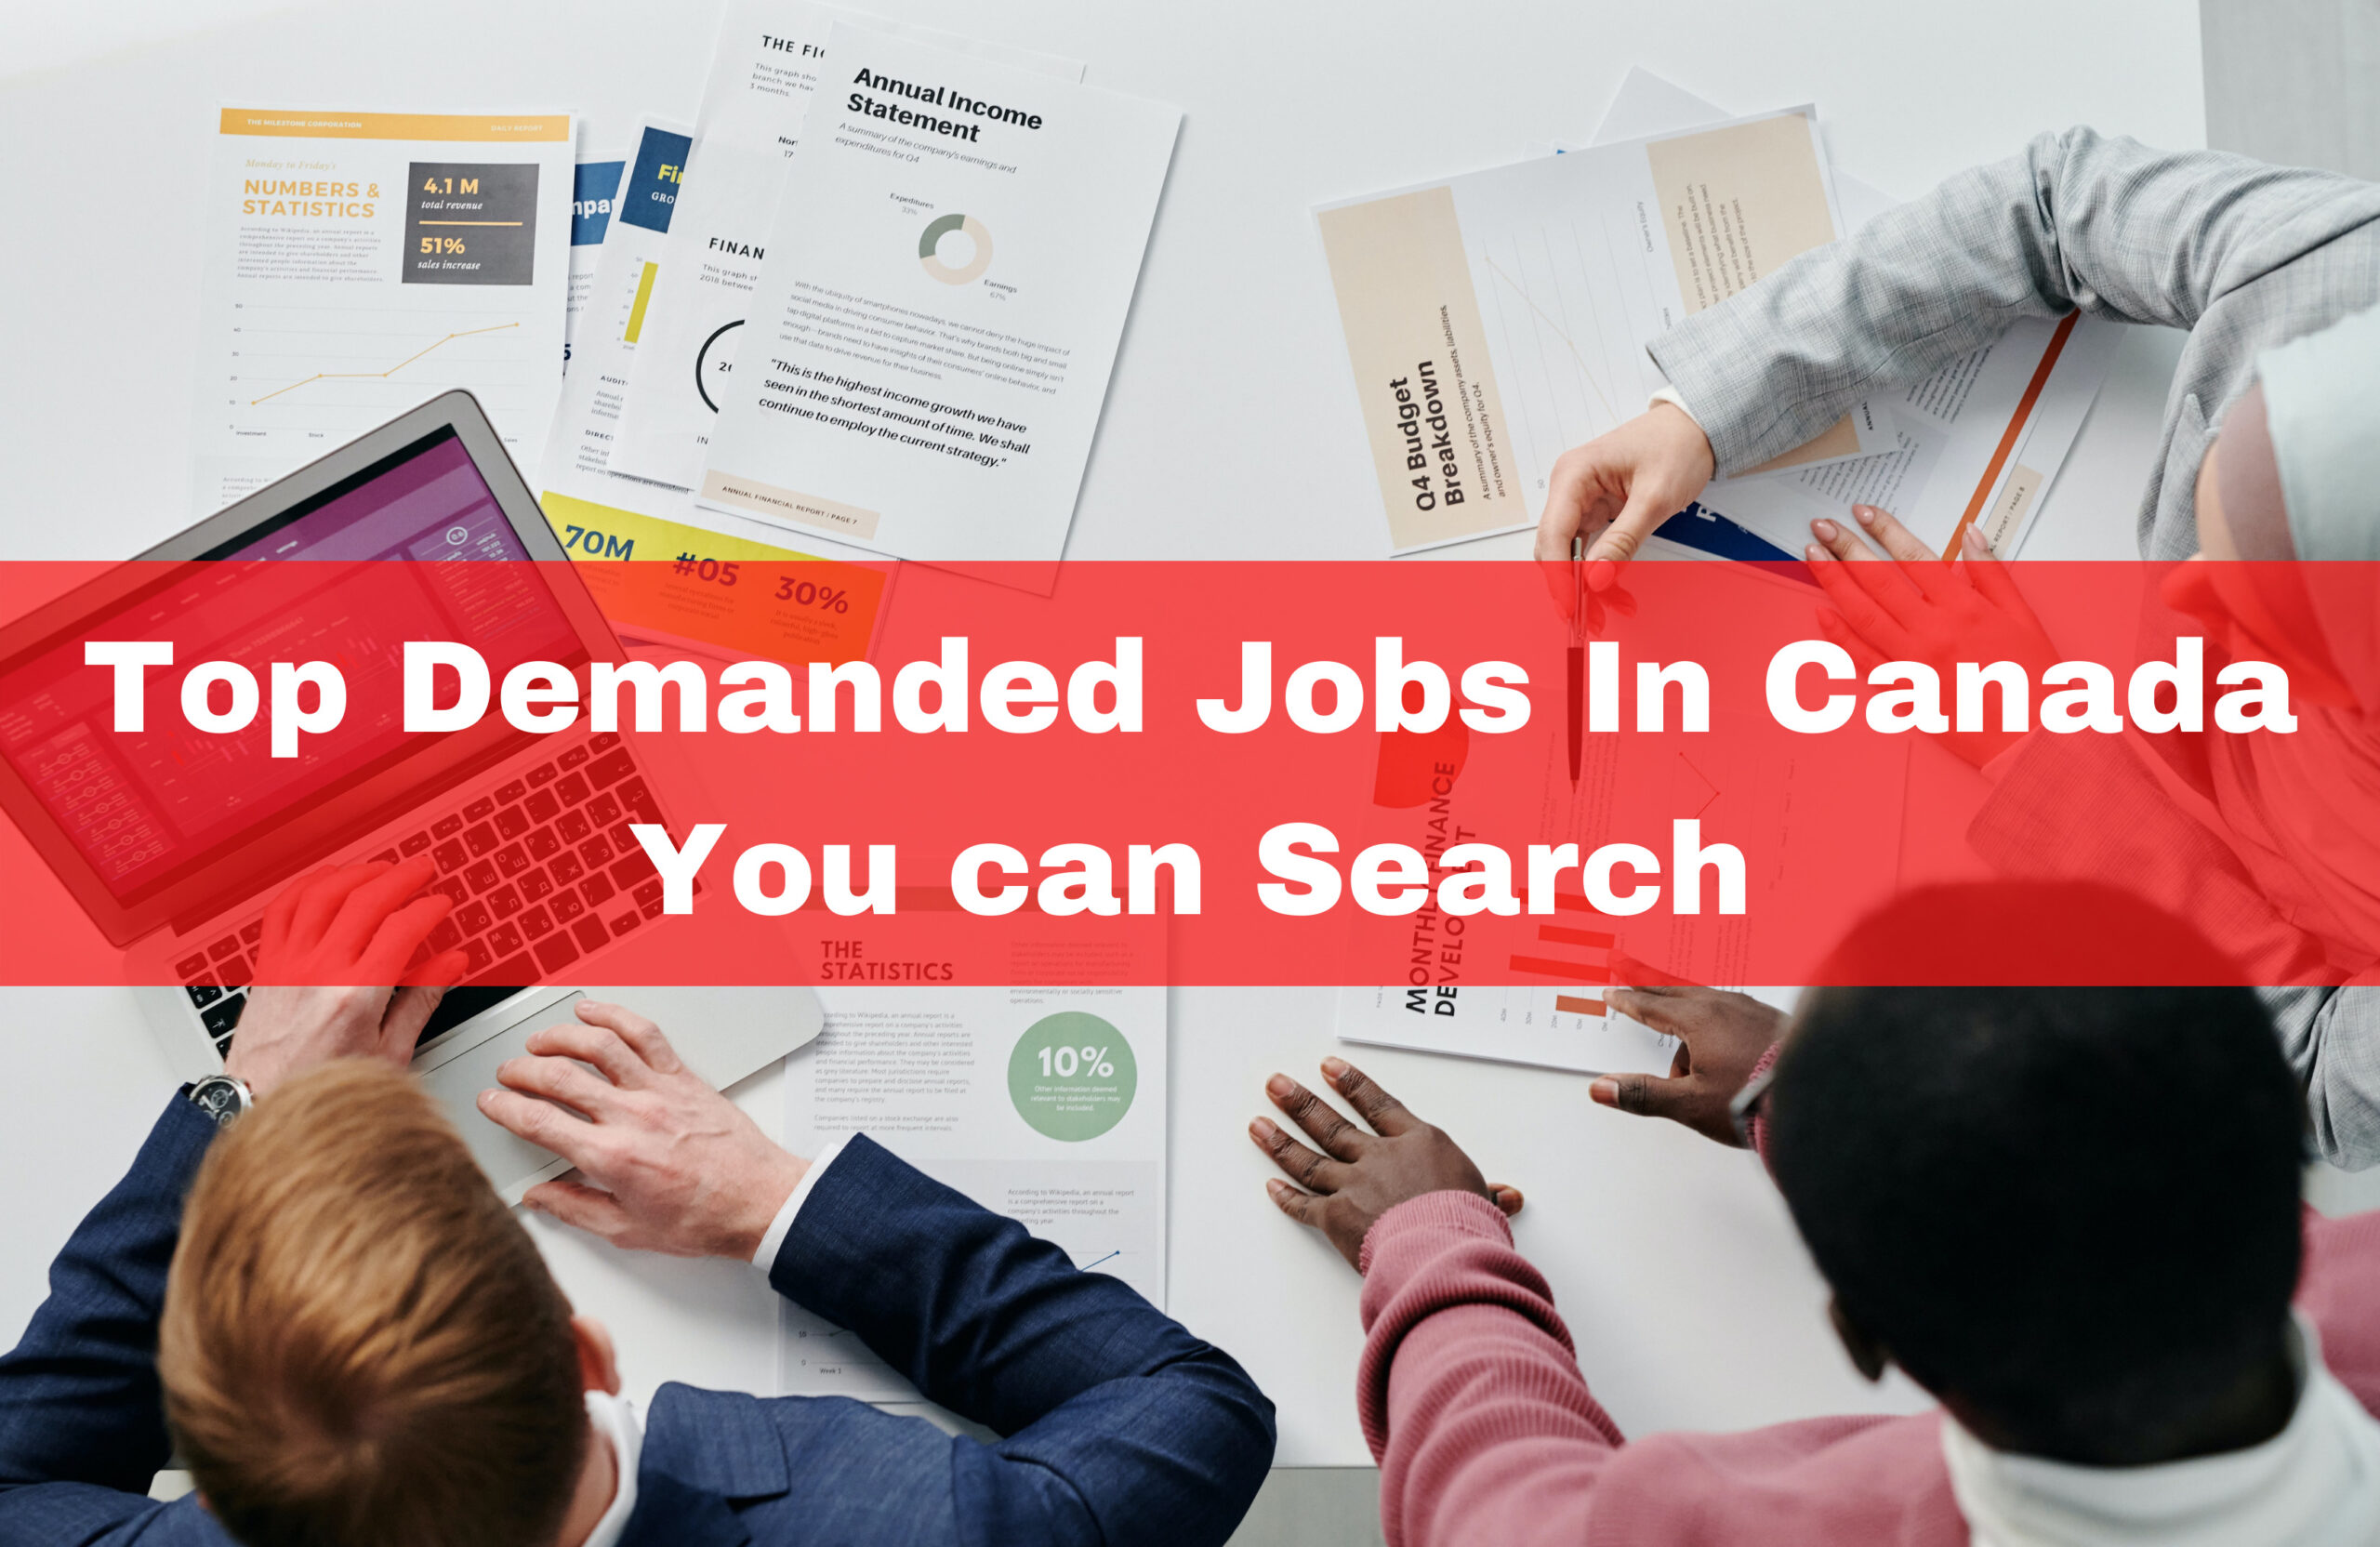 You are currently viewing Top Demanded Jobs In Canada You can Search.